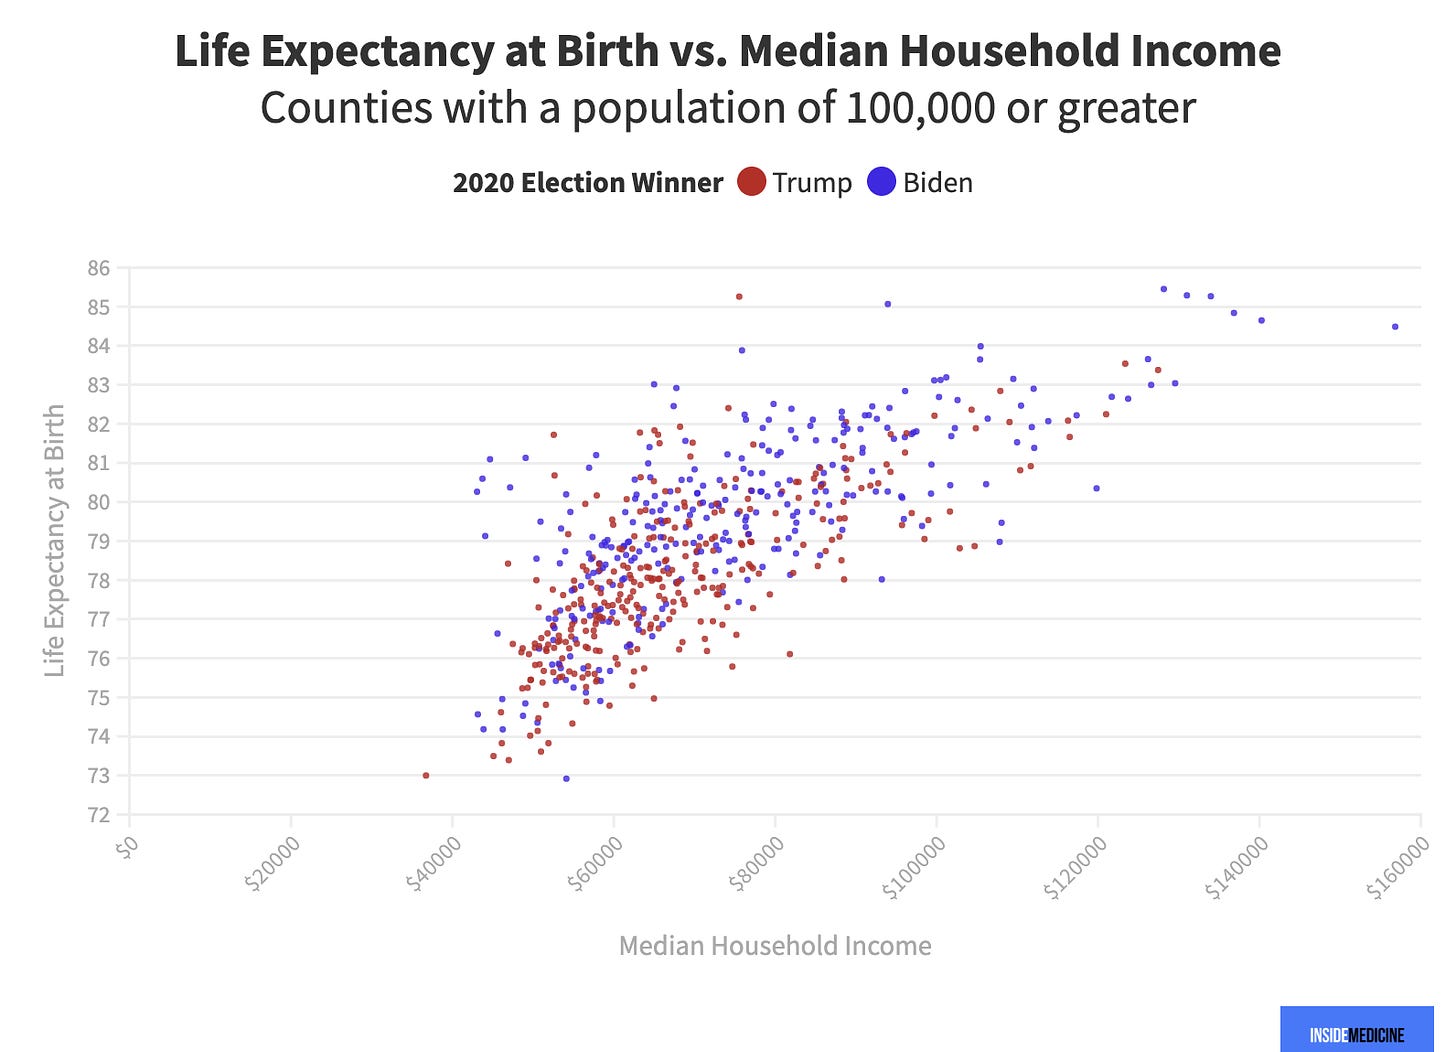 scatter of life expectancy at birth, income, and 2020 voting